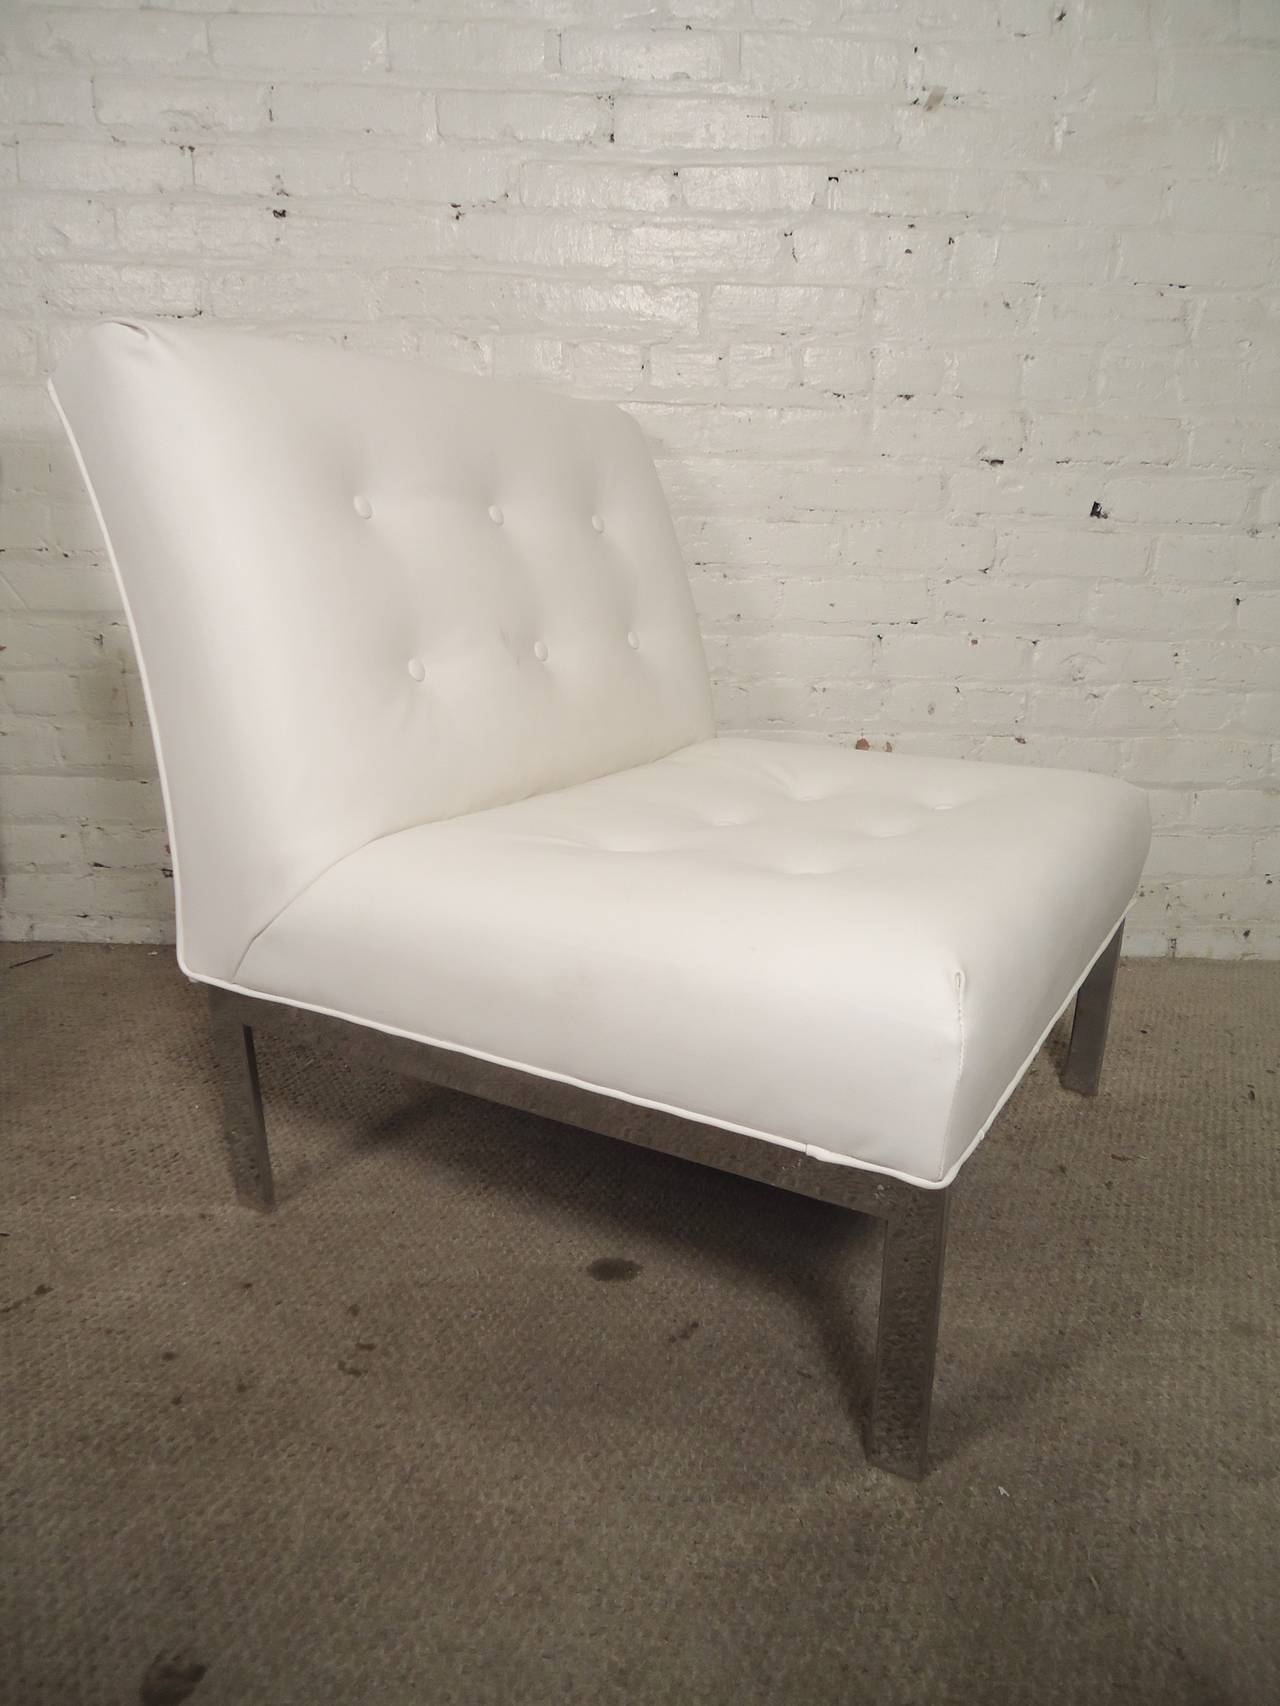 Sleek and sturdy side chairs with polished chrome base, newly recovered in a tufted white Naugahyde. Simple and handsome in style, great for home or office.

(Please confirm item location - NY or NJ - with dealer).